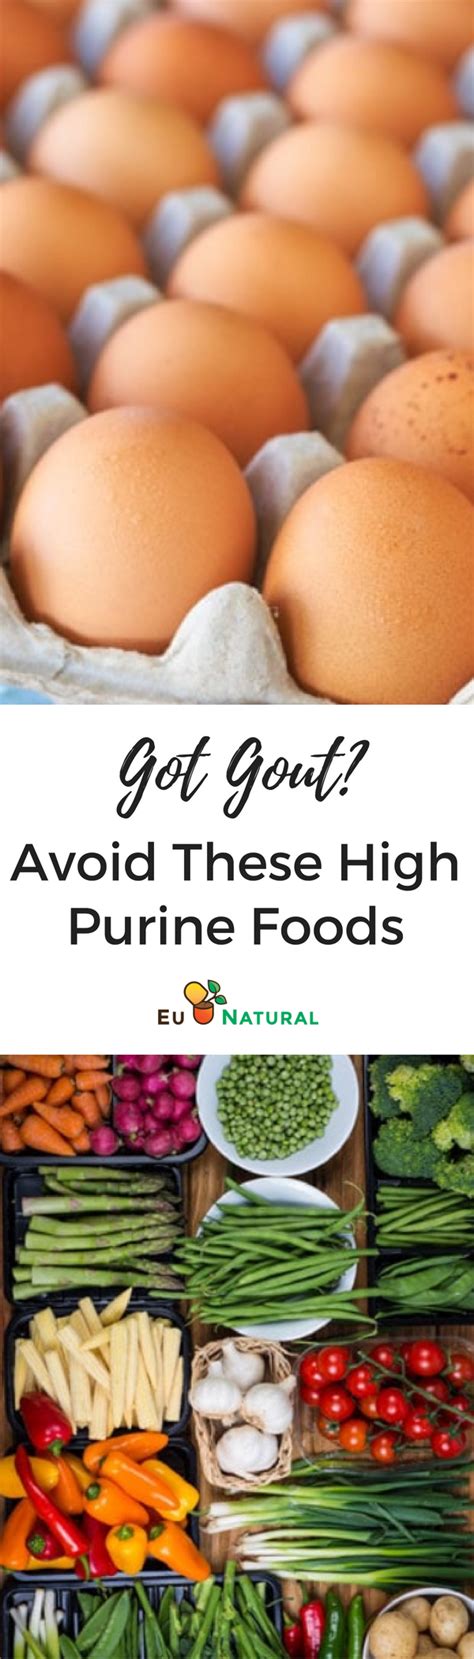 Got Gout Avoid These High Purine Foods Now Essential Oils For Gout